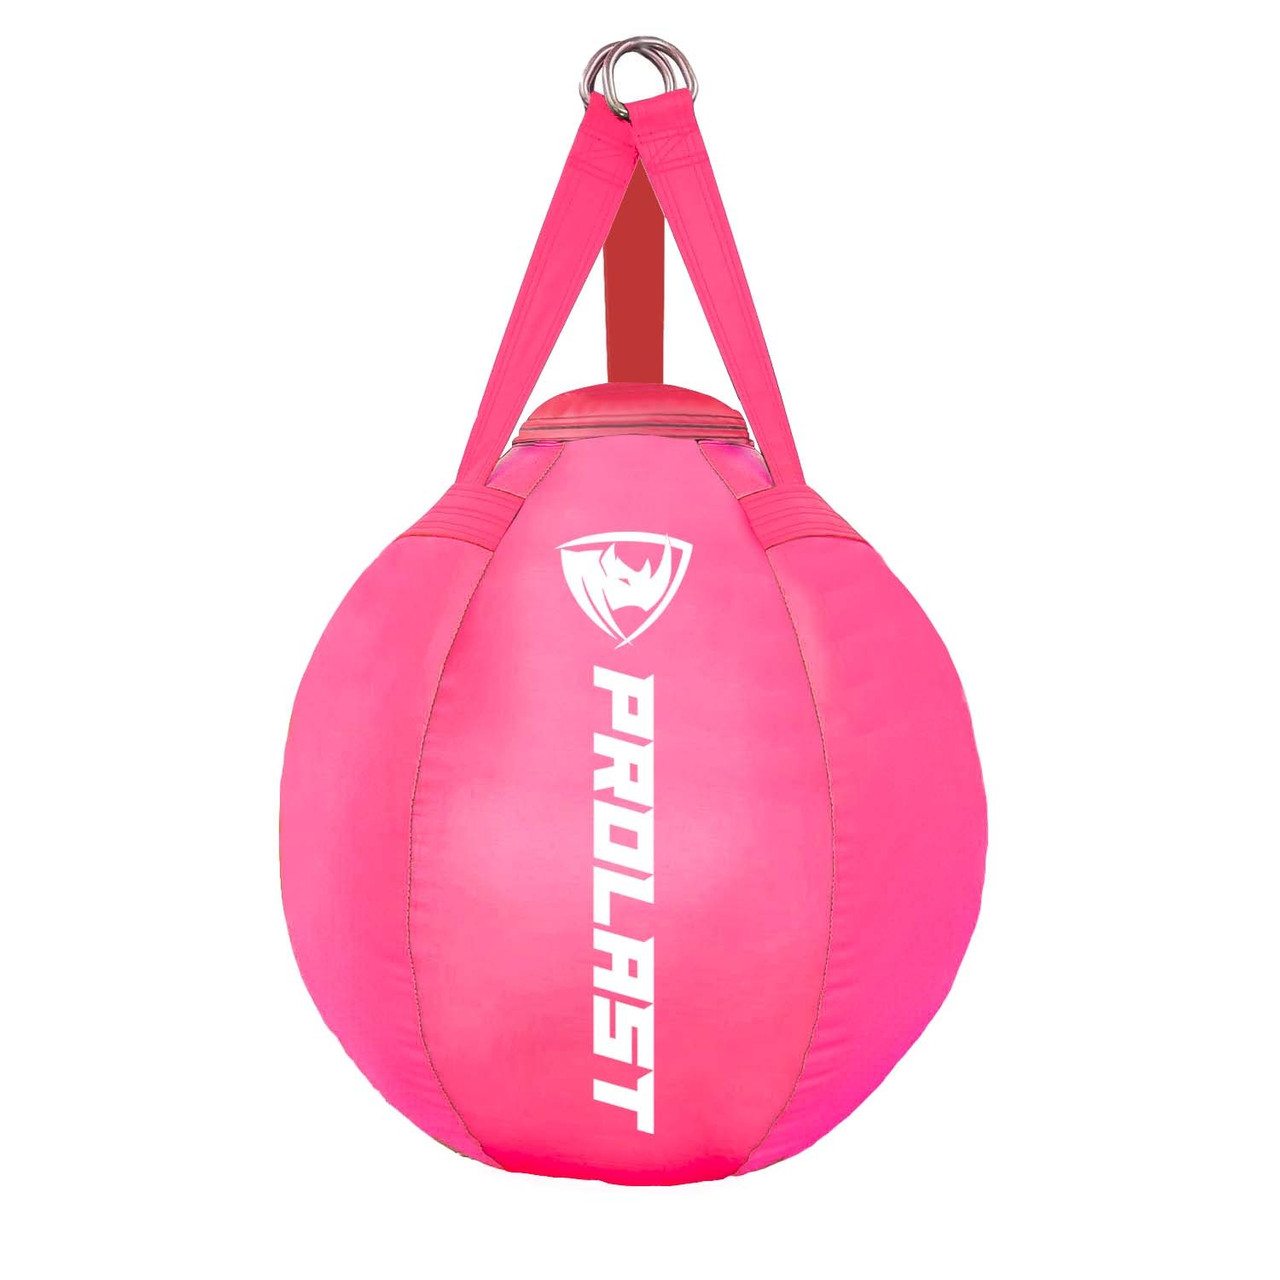 70lb Wrecking Ball Round Heavy Bag Pink Made in USA